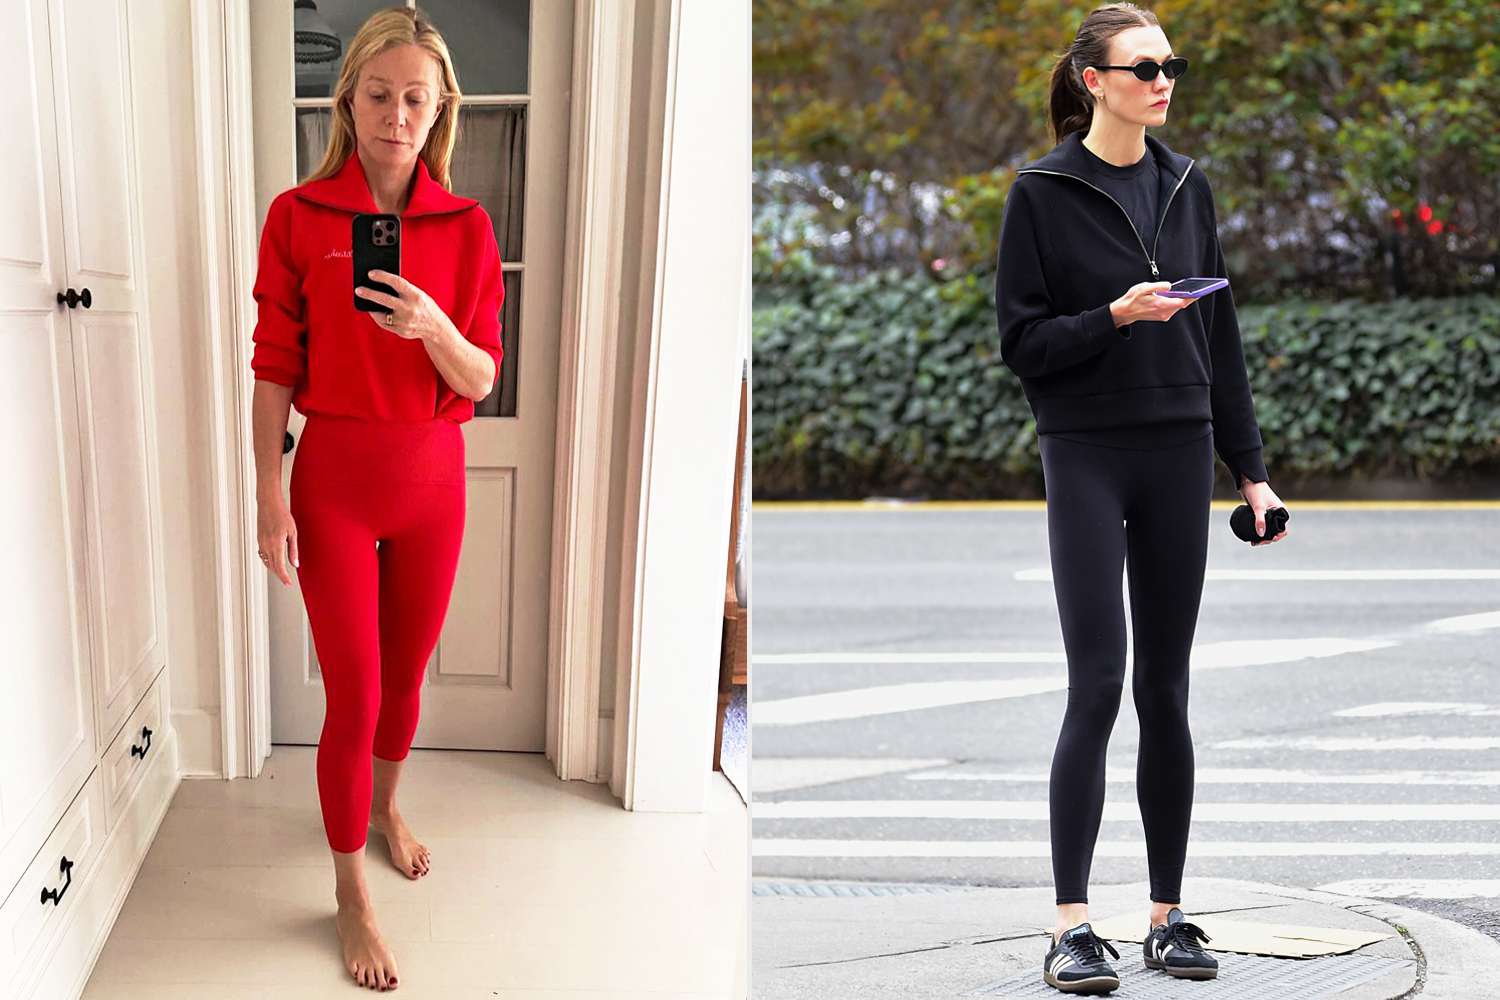 Karlie Kloss, Gwyneth Paltrow, and More Celebs Wear This Spanx Sweatshirt That’s ‘the Comfiest Thing’ Shoppers Own